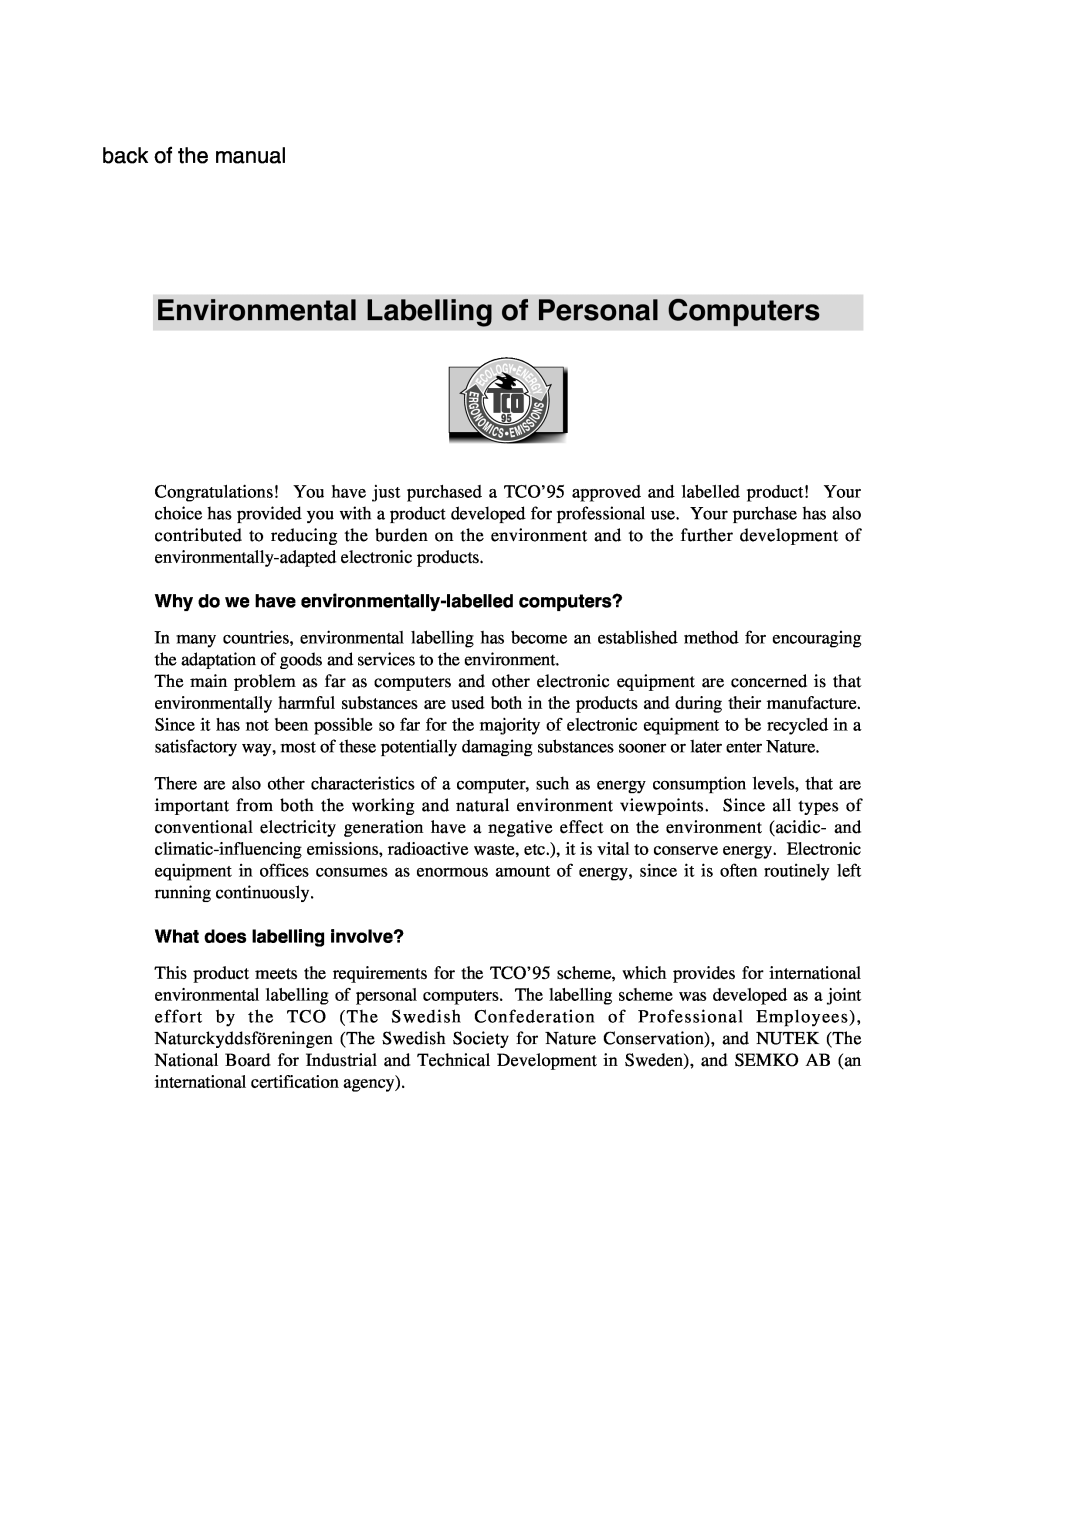 IBM 72H9623, T56A, 9483 Environmental Labelling of Personal Computers, back of the manual, What does labelling involve? 